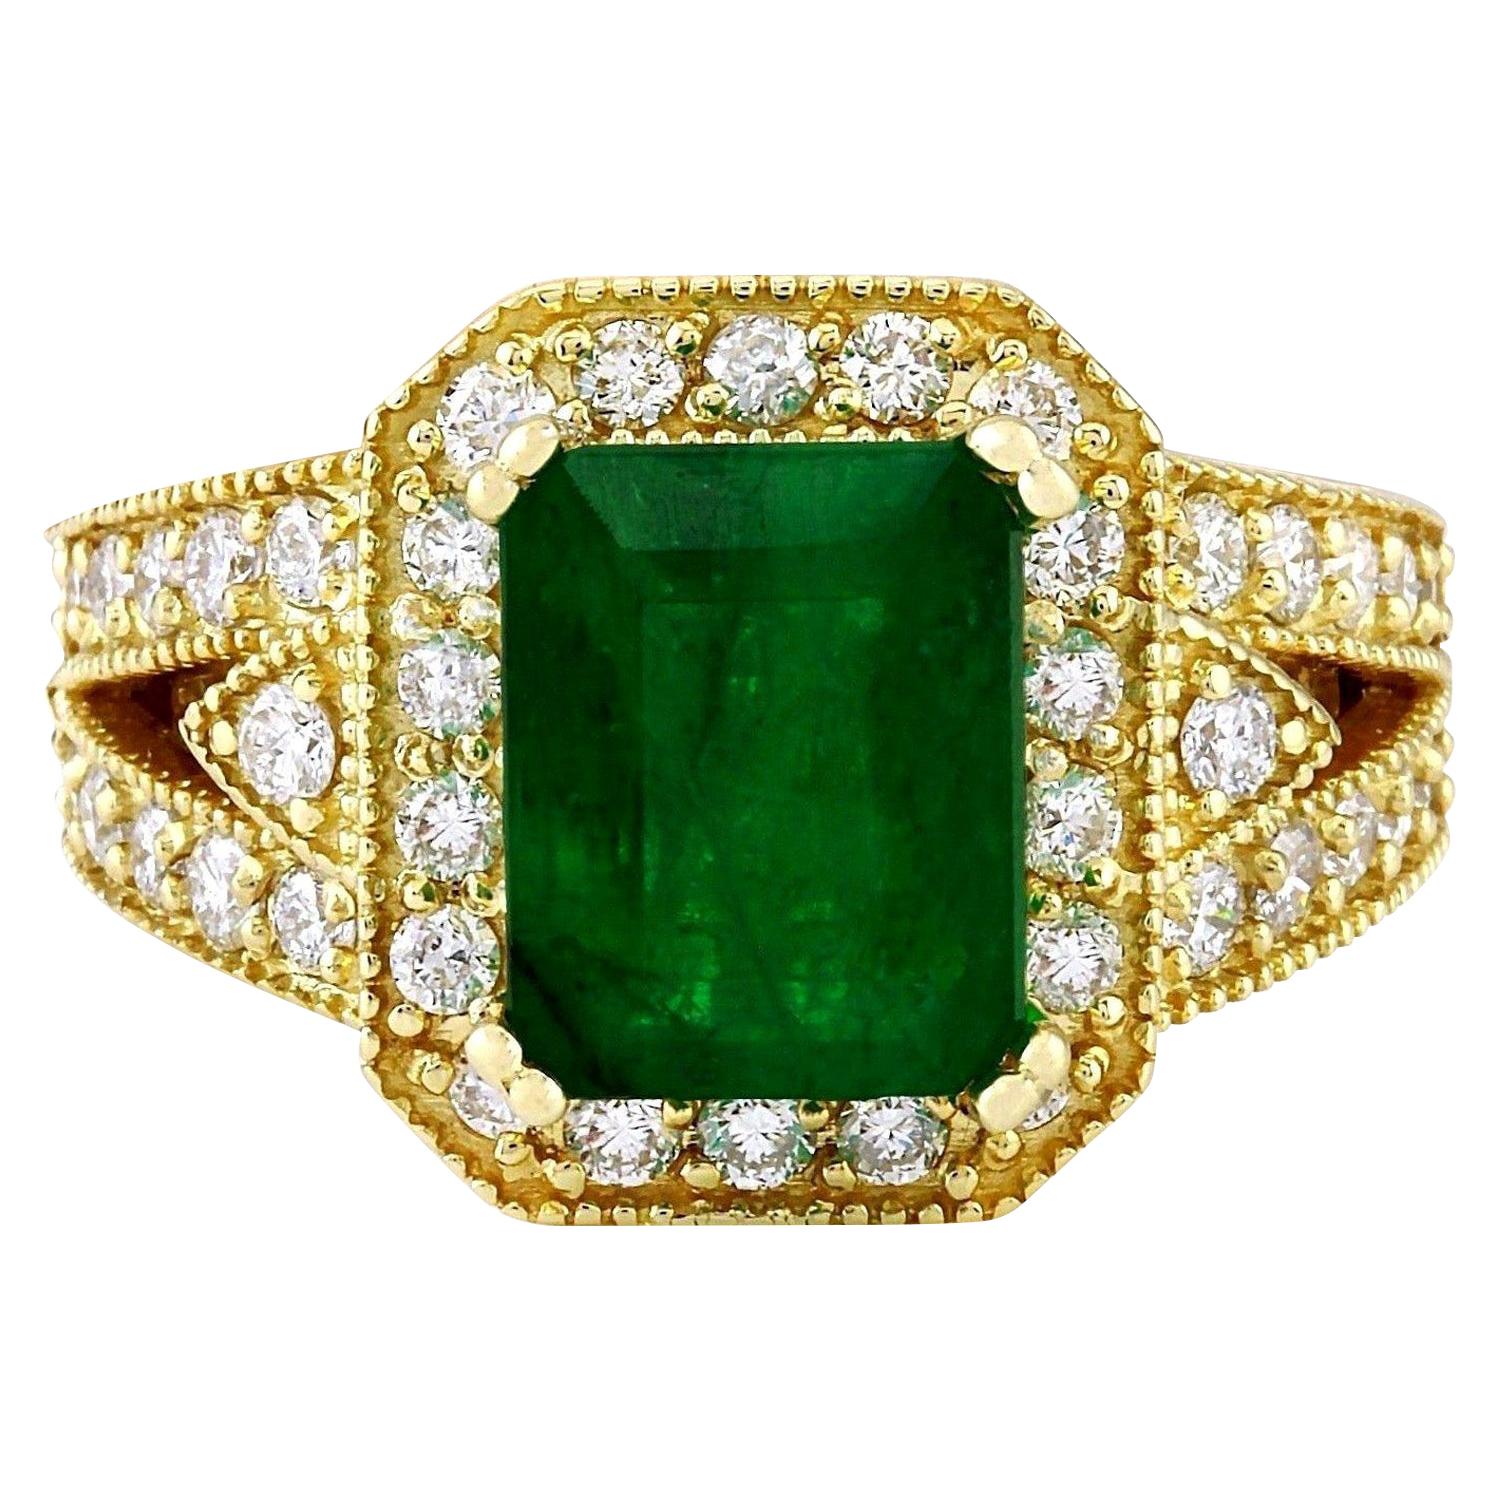 4.35 Carat Genuine Emerald 14K Solid Yellow Gold Diamond Ring For Sale